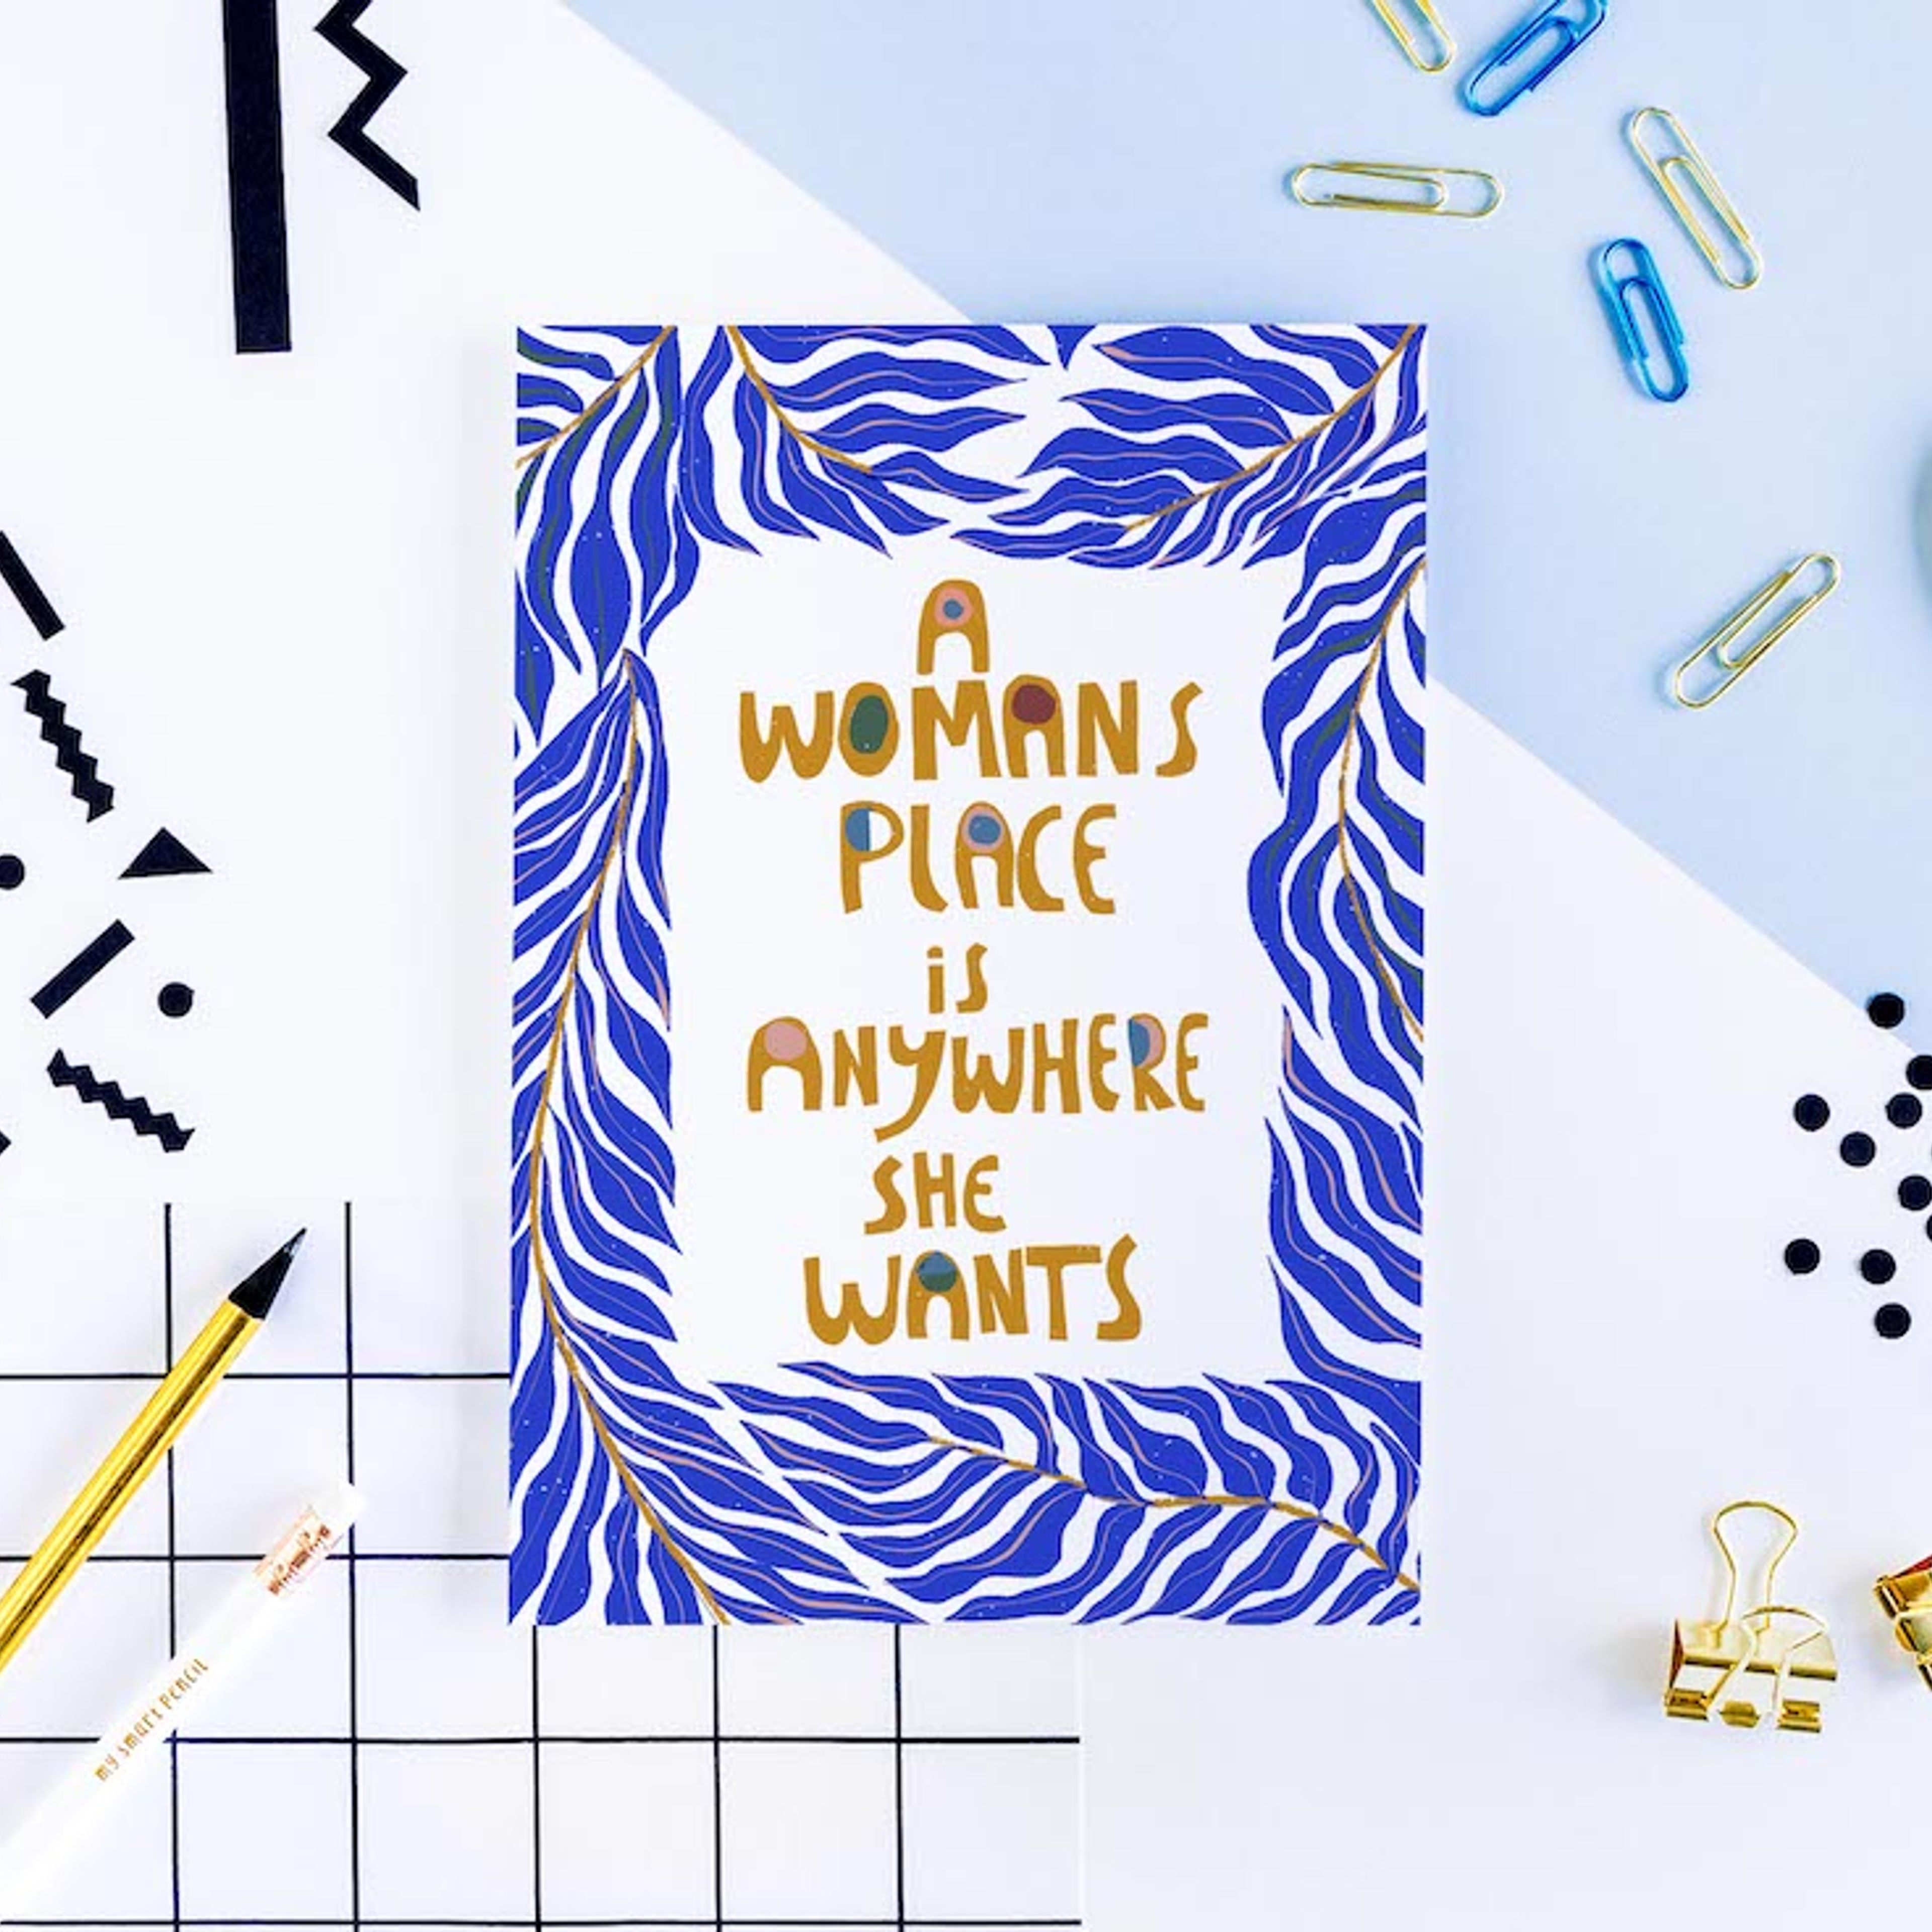 A Women's Place is Anywhere she Wants Greeting Card